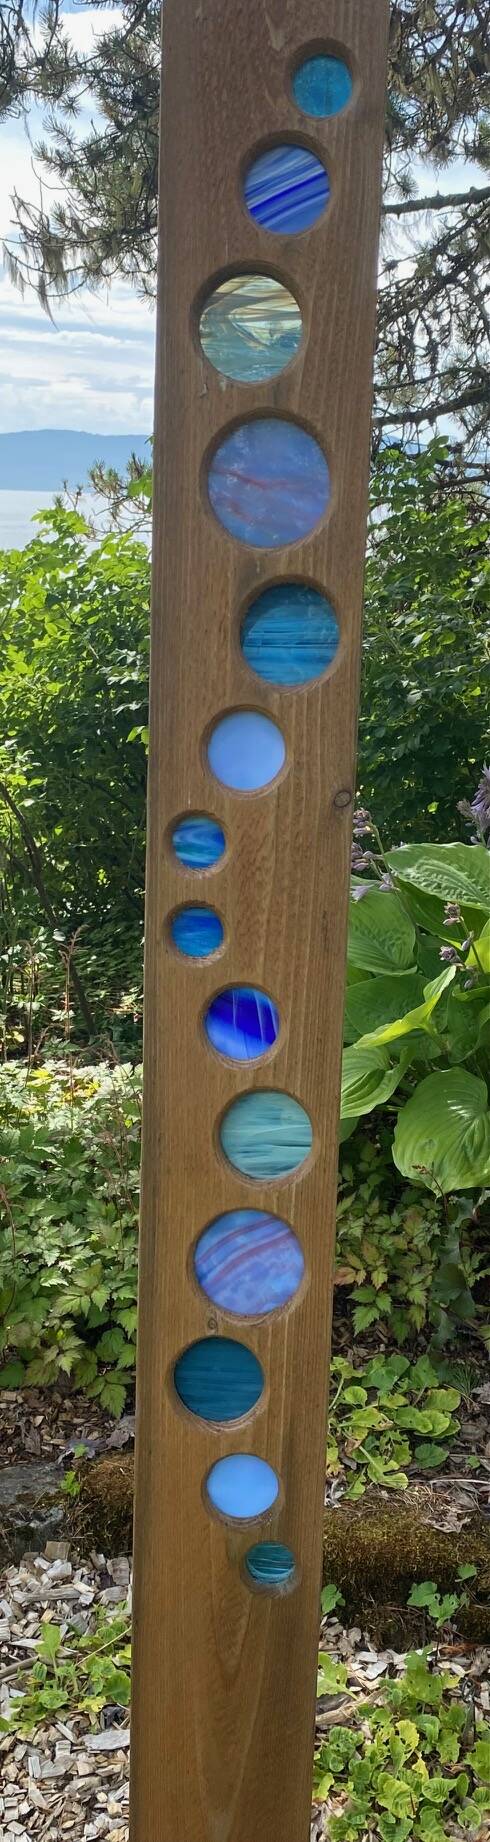 Circular shades of blue wend their way down a wooden post at the Arboretum seen on Aug. 5. (Photo by Denise Carroll)